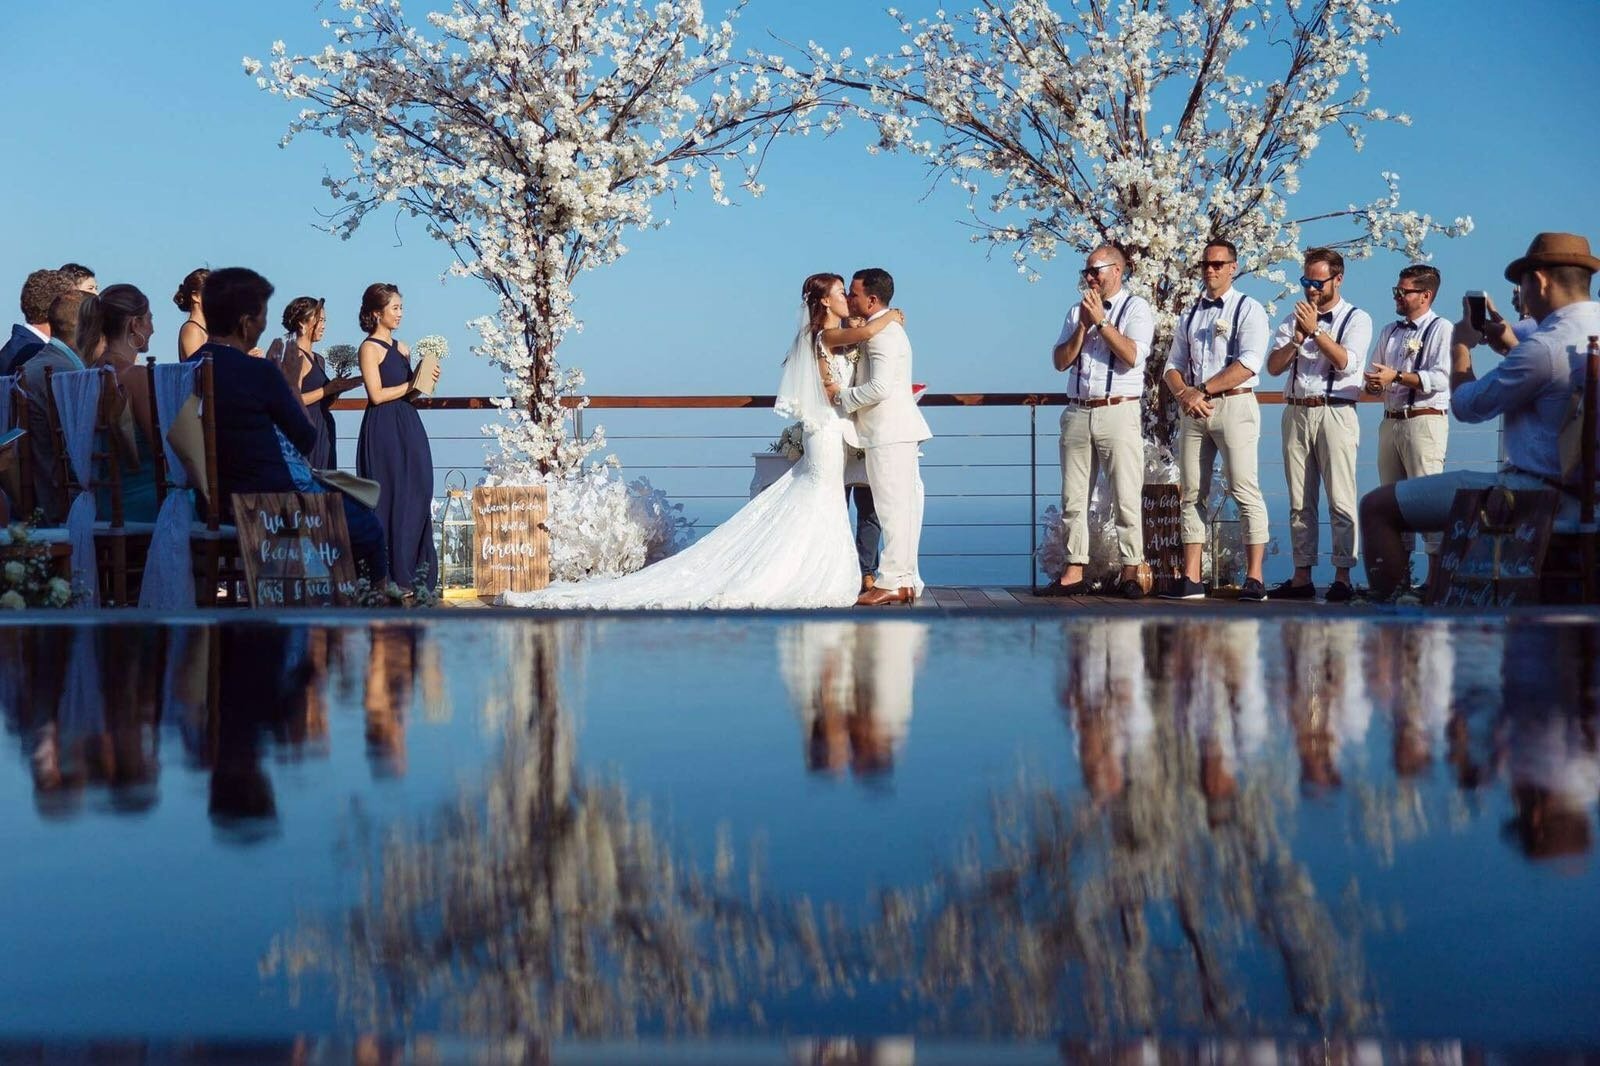   THE EDGE 'THE SEA' WEDDING FOR 50 PAX NOW USD 16,199 NET ONLY!  